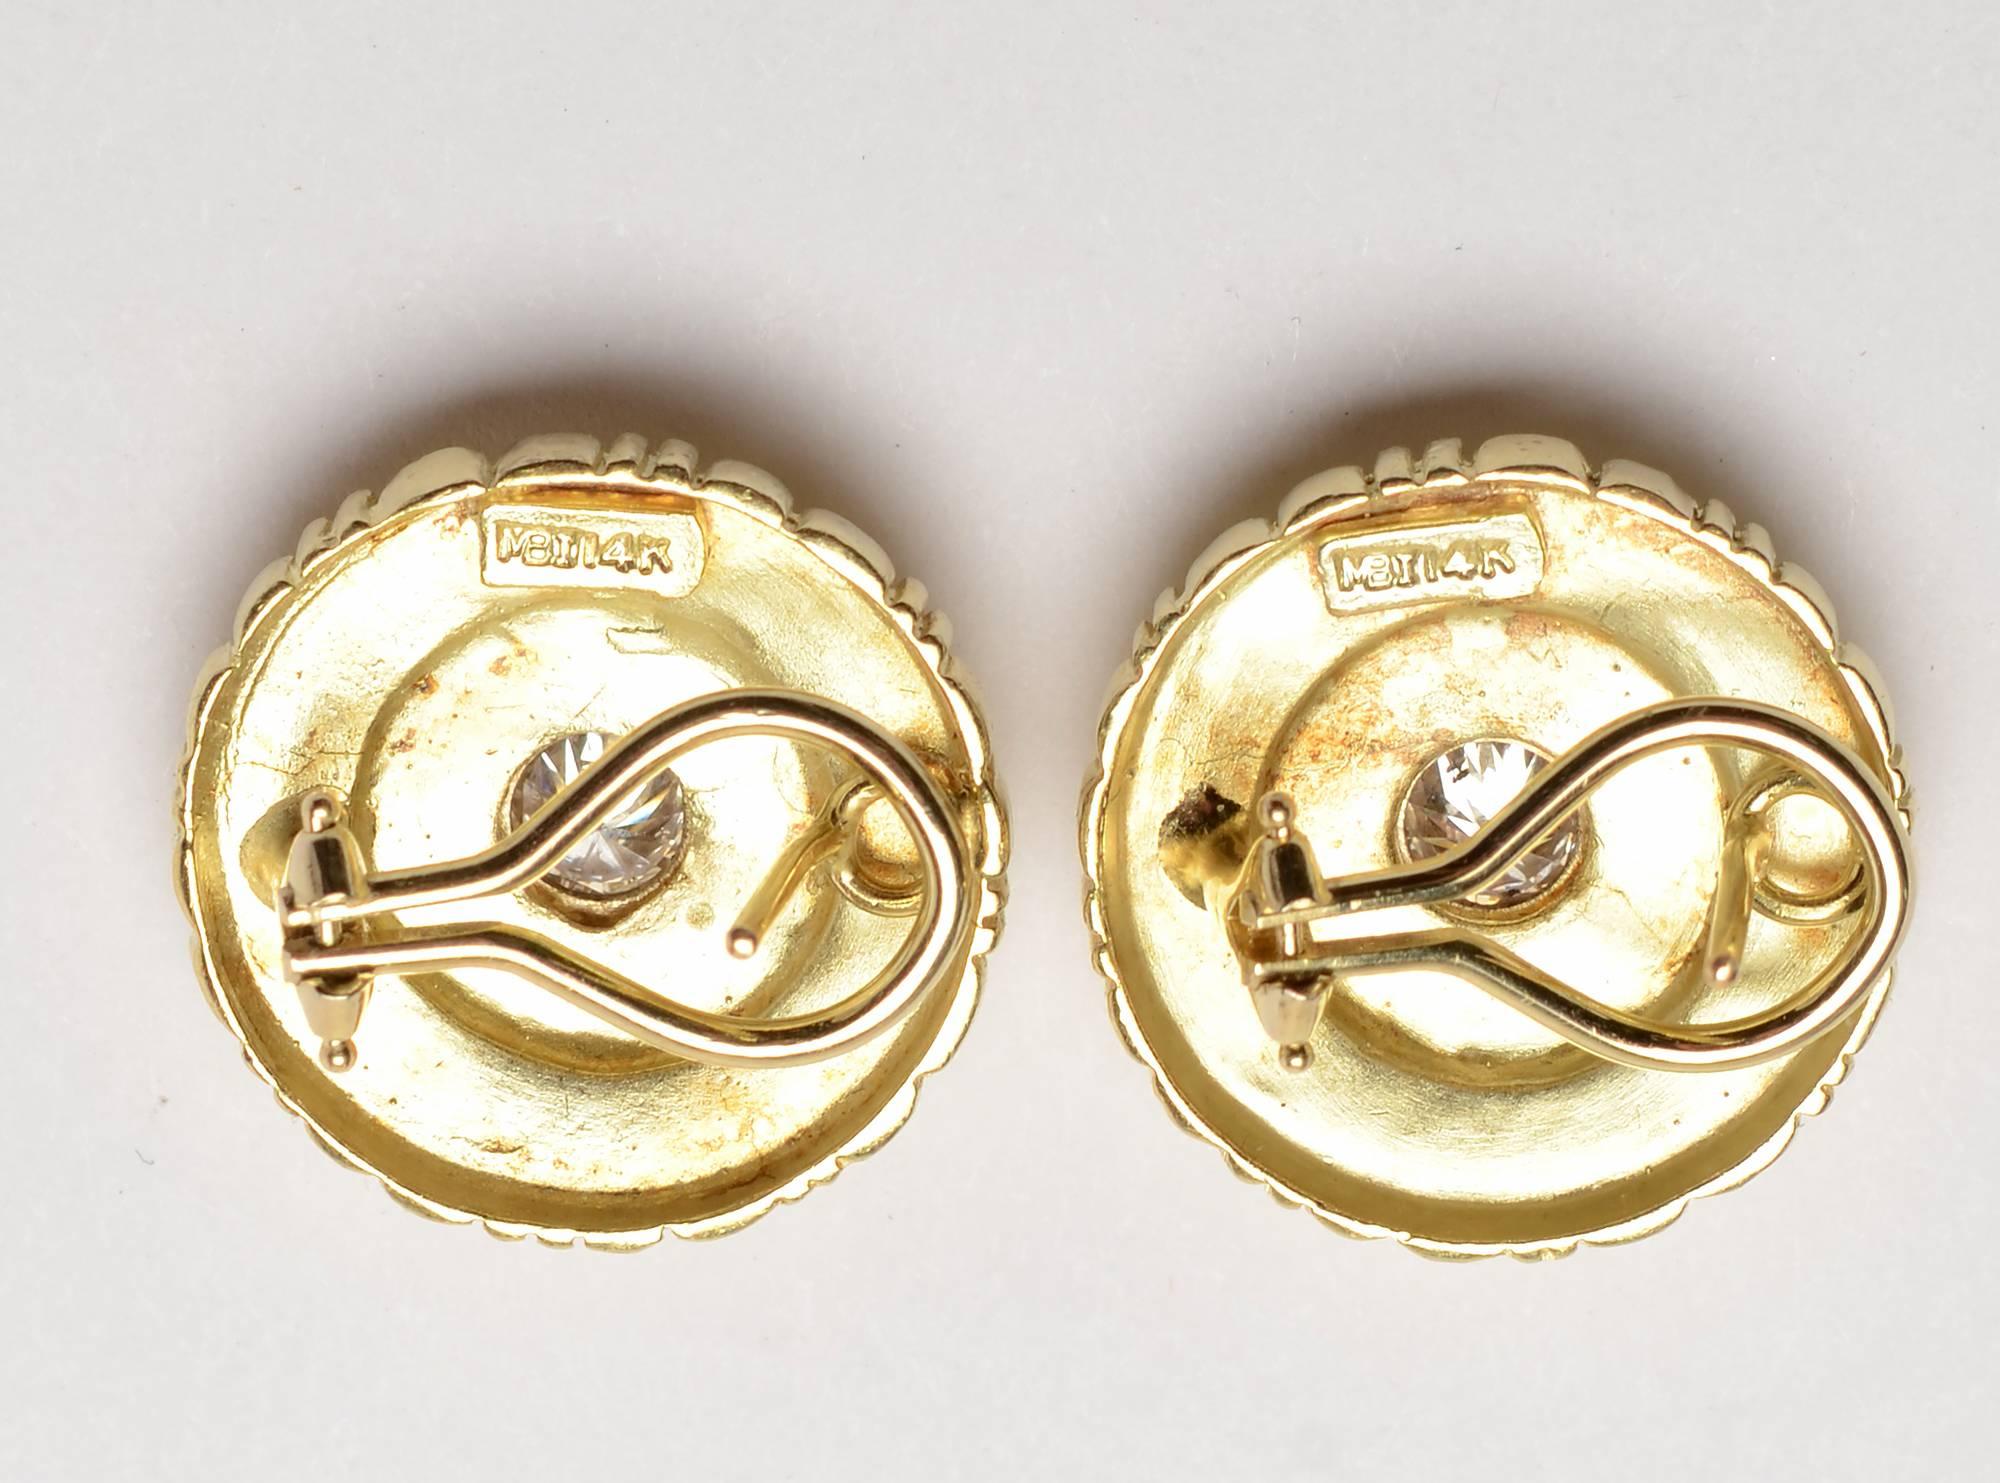 These round gold earrings have a stepped design of rectangles, bars and balls. They radiate from the half carat center diamond. 
Backs are posts and clips. A maker's mark is not quite decipherable. Measurement is 13/16